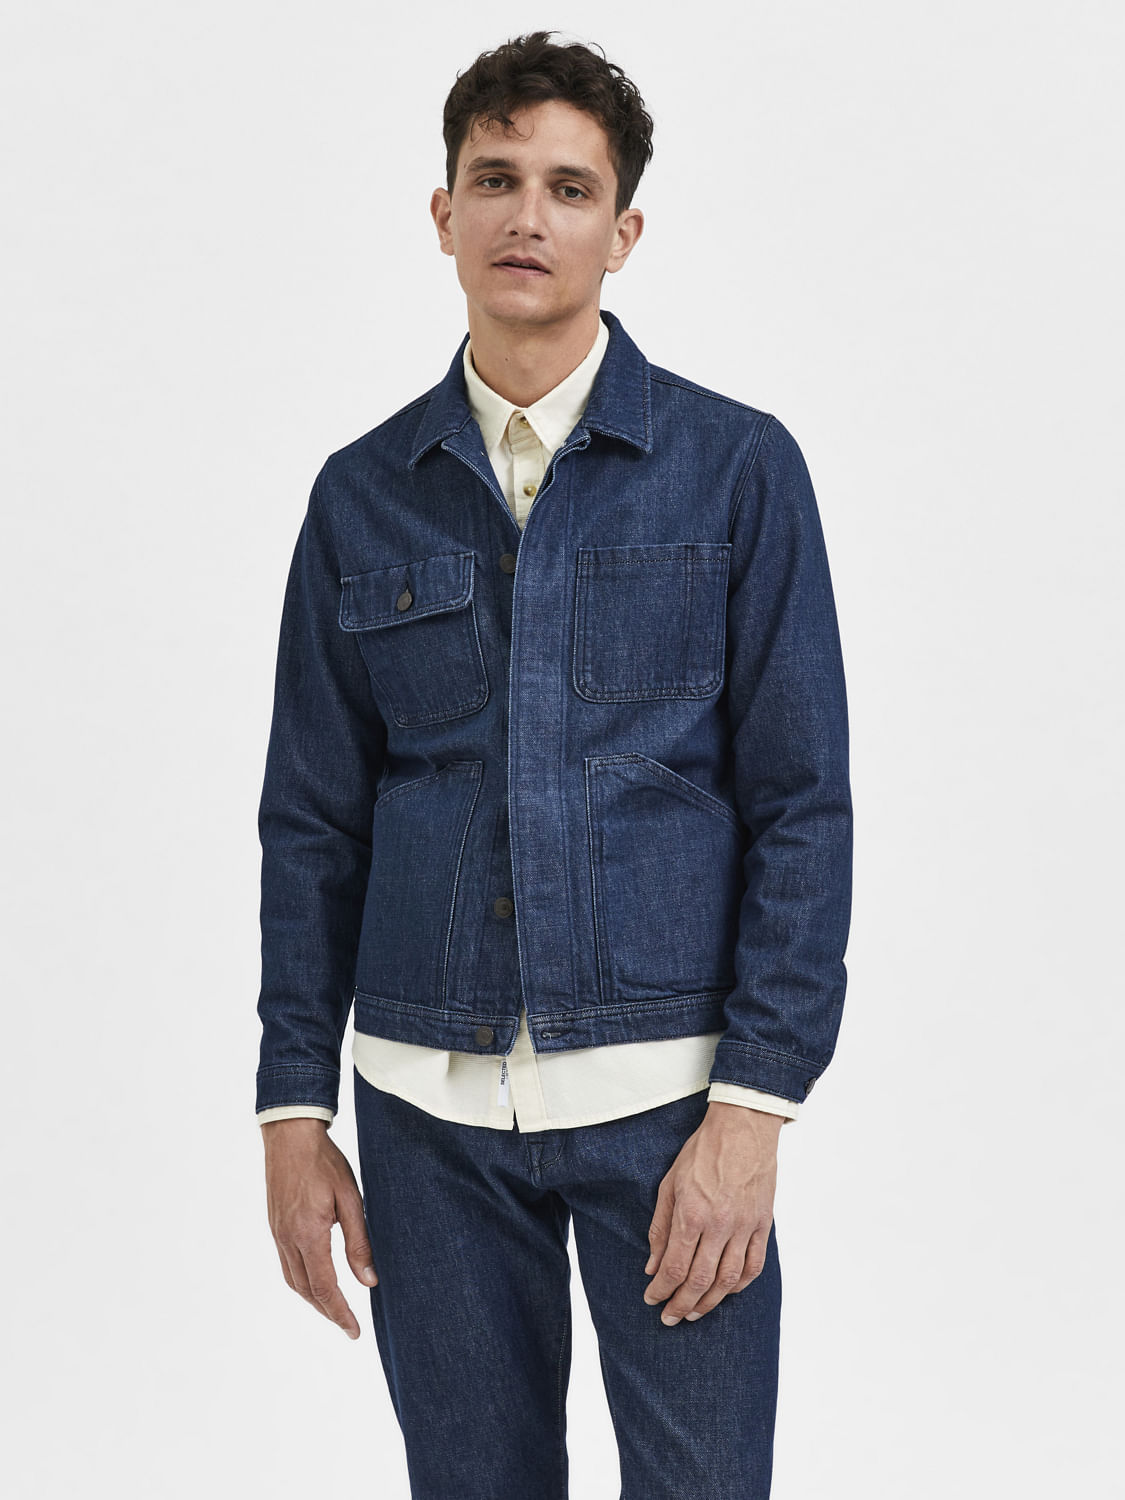 Denim Shirts for Women | Lyst - Page 20